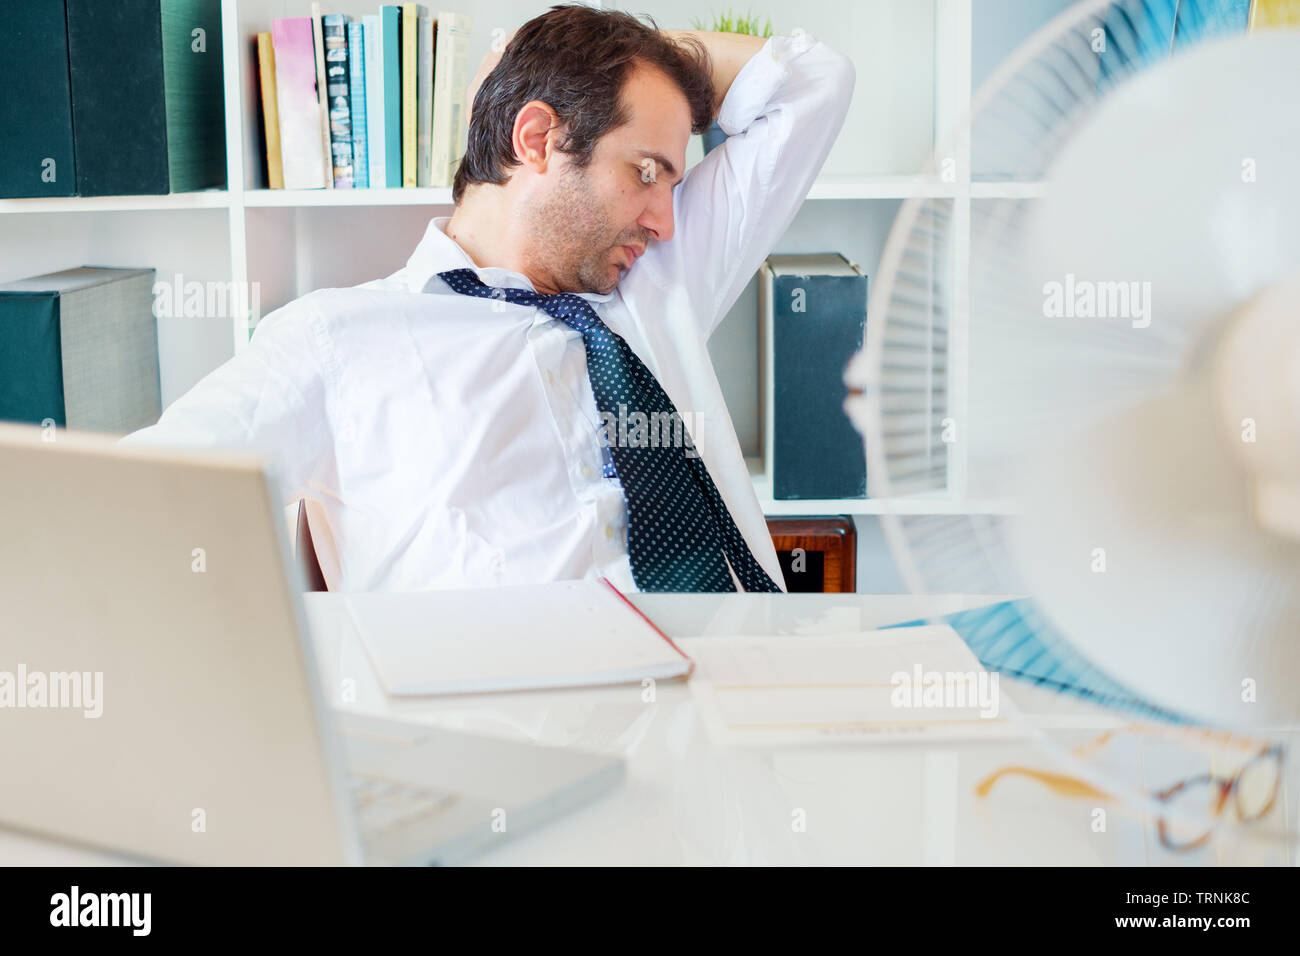 Office employee sweating and smelling and notices his sweat under armpit Stock Photo